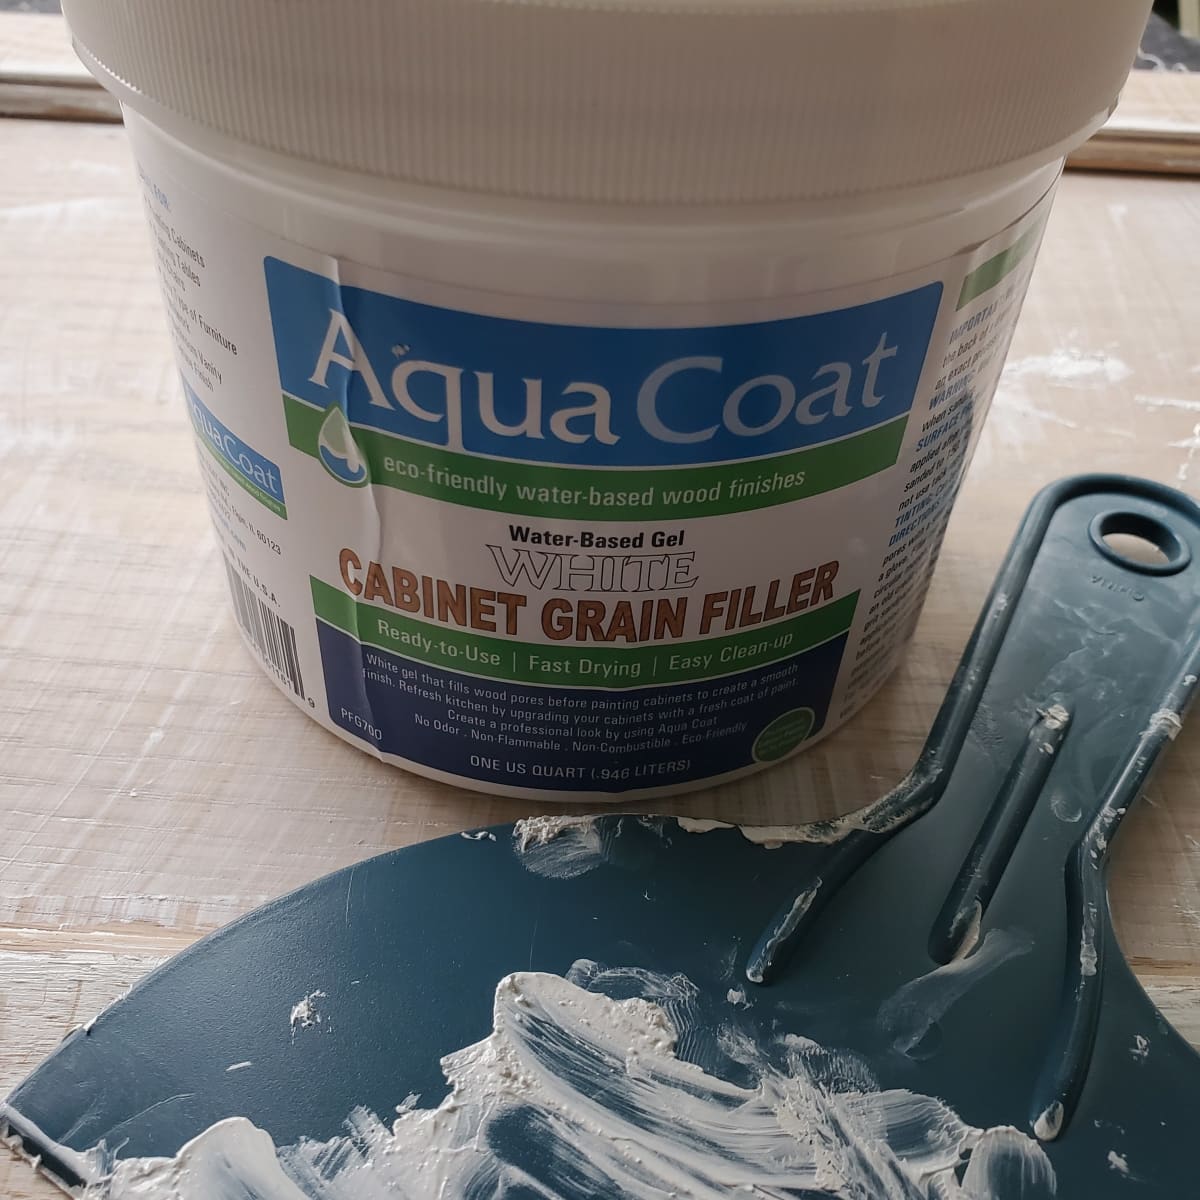 The Best Wood Filler, Including Latex and Water-Based Wood Filler